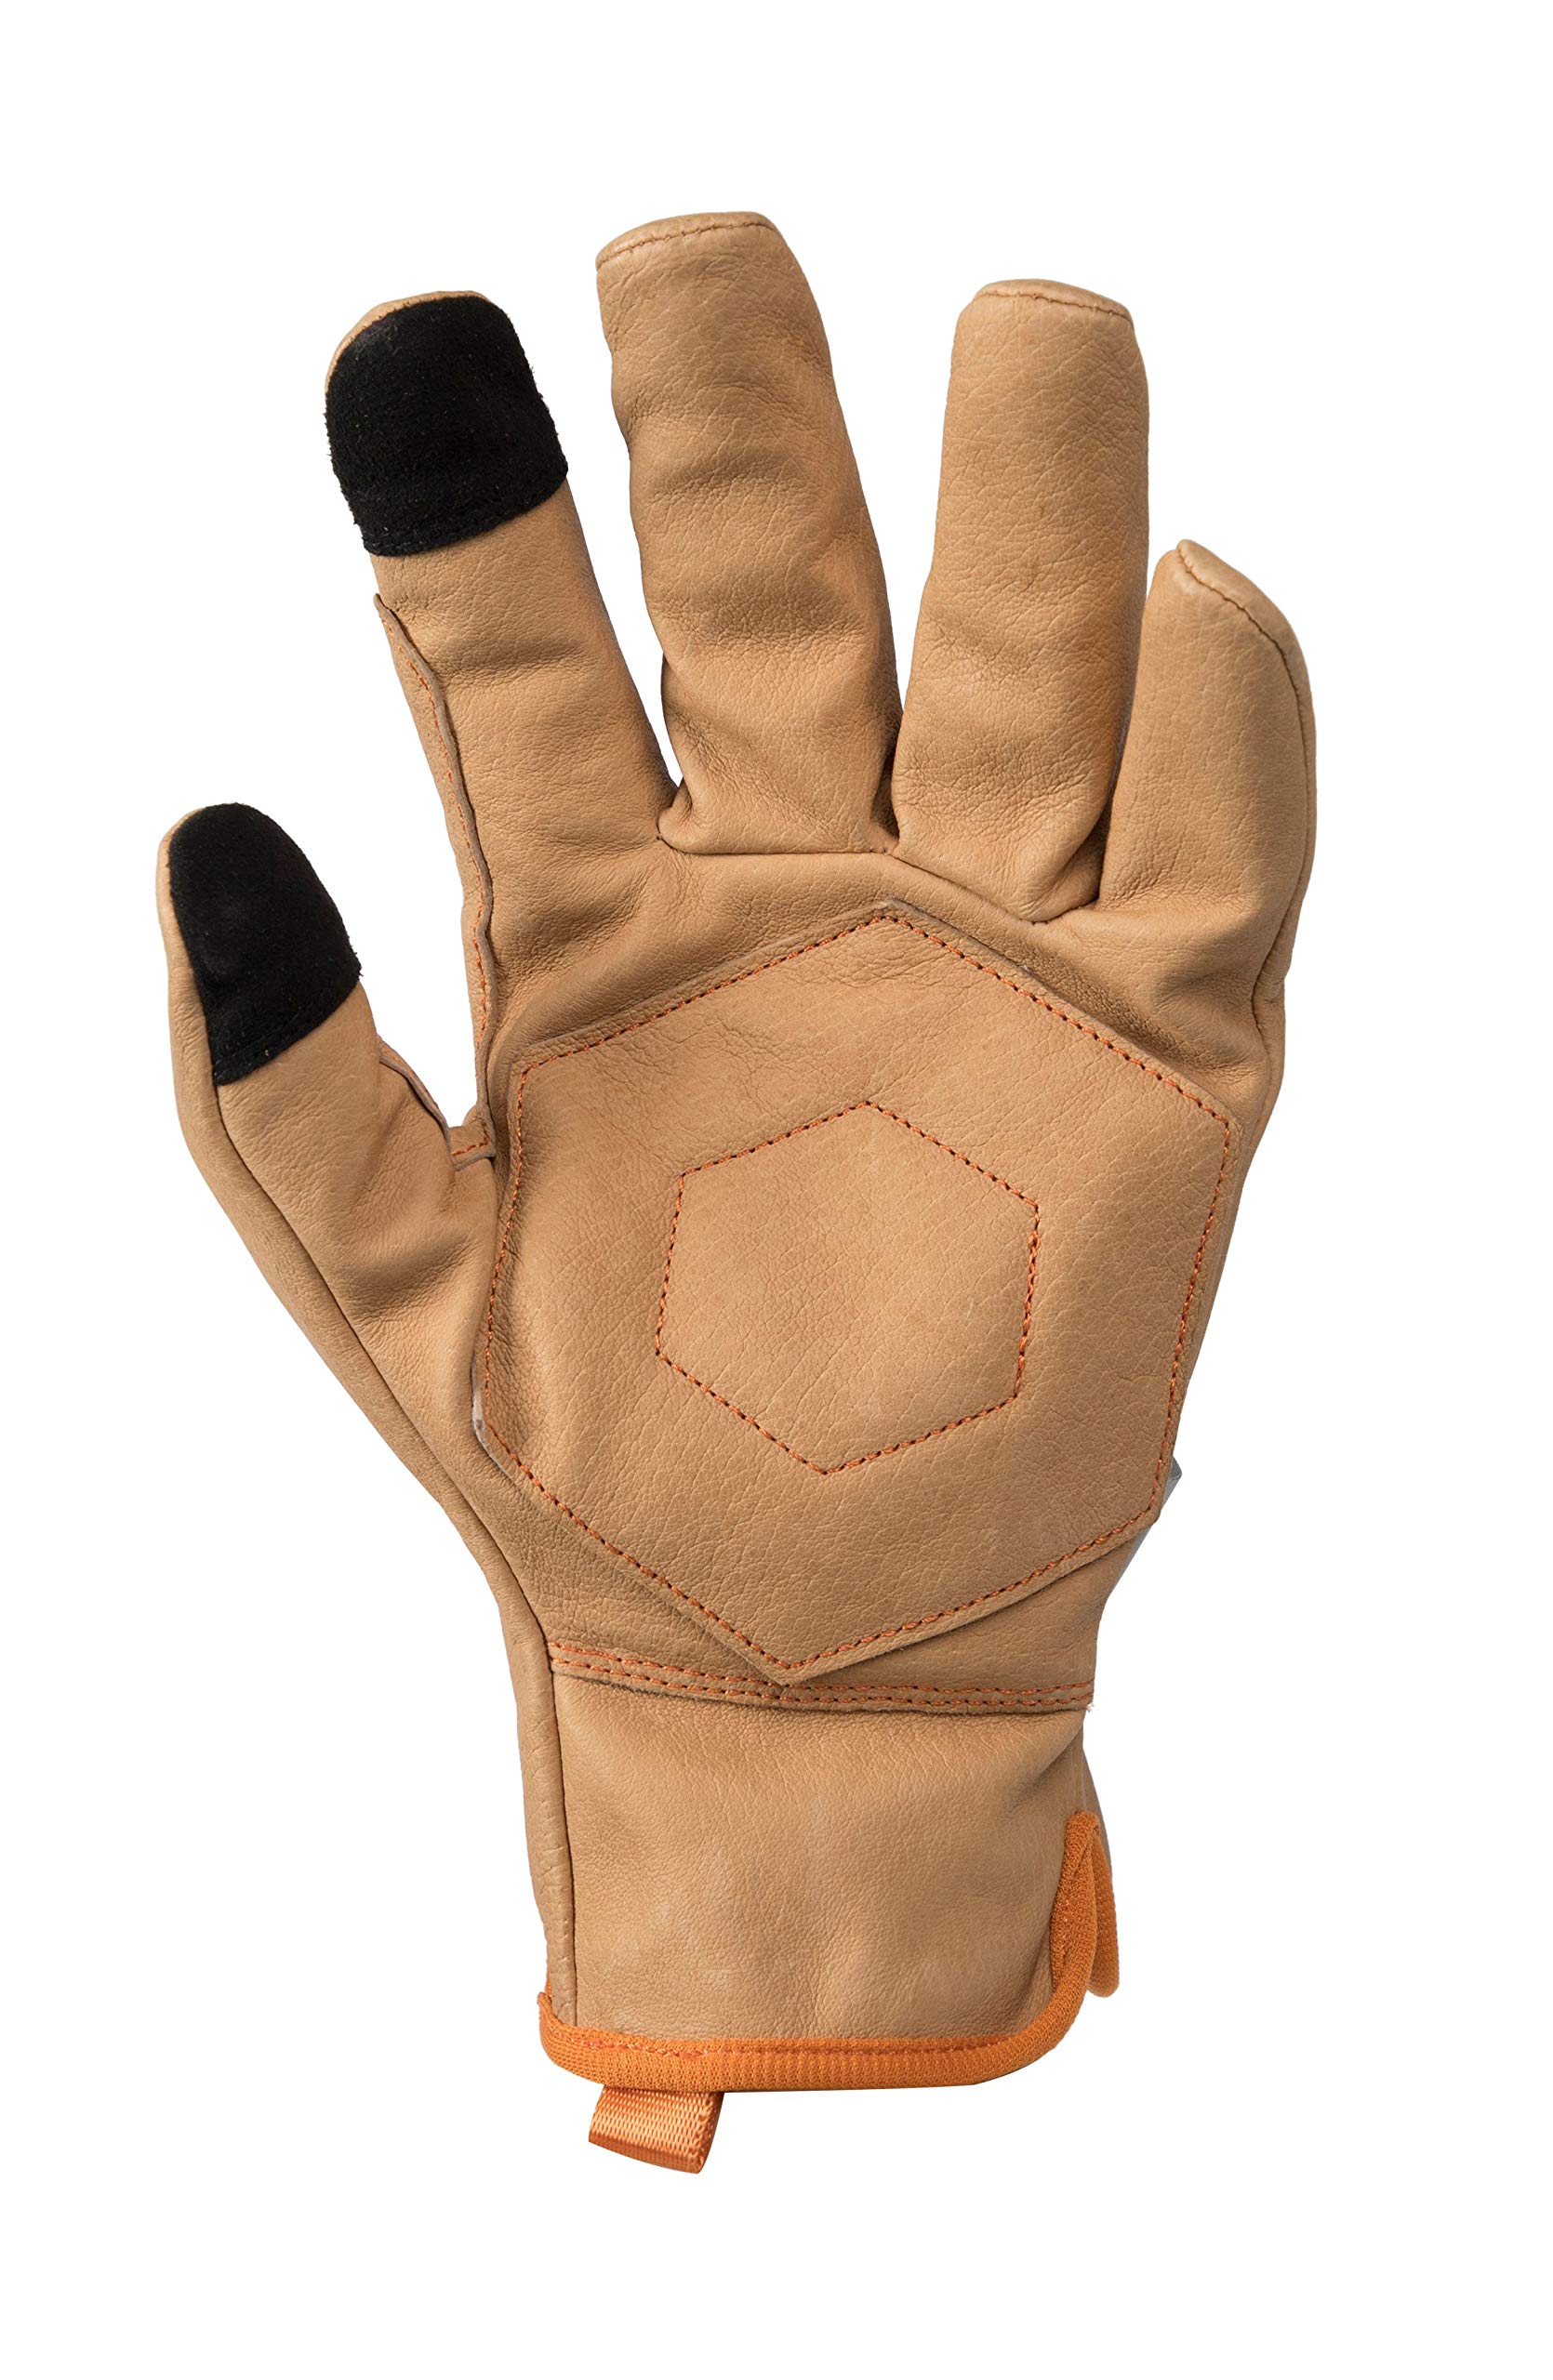 Timberland PRO Men's Leather Work Glove